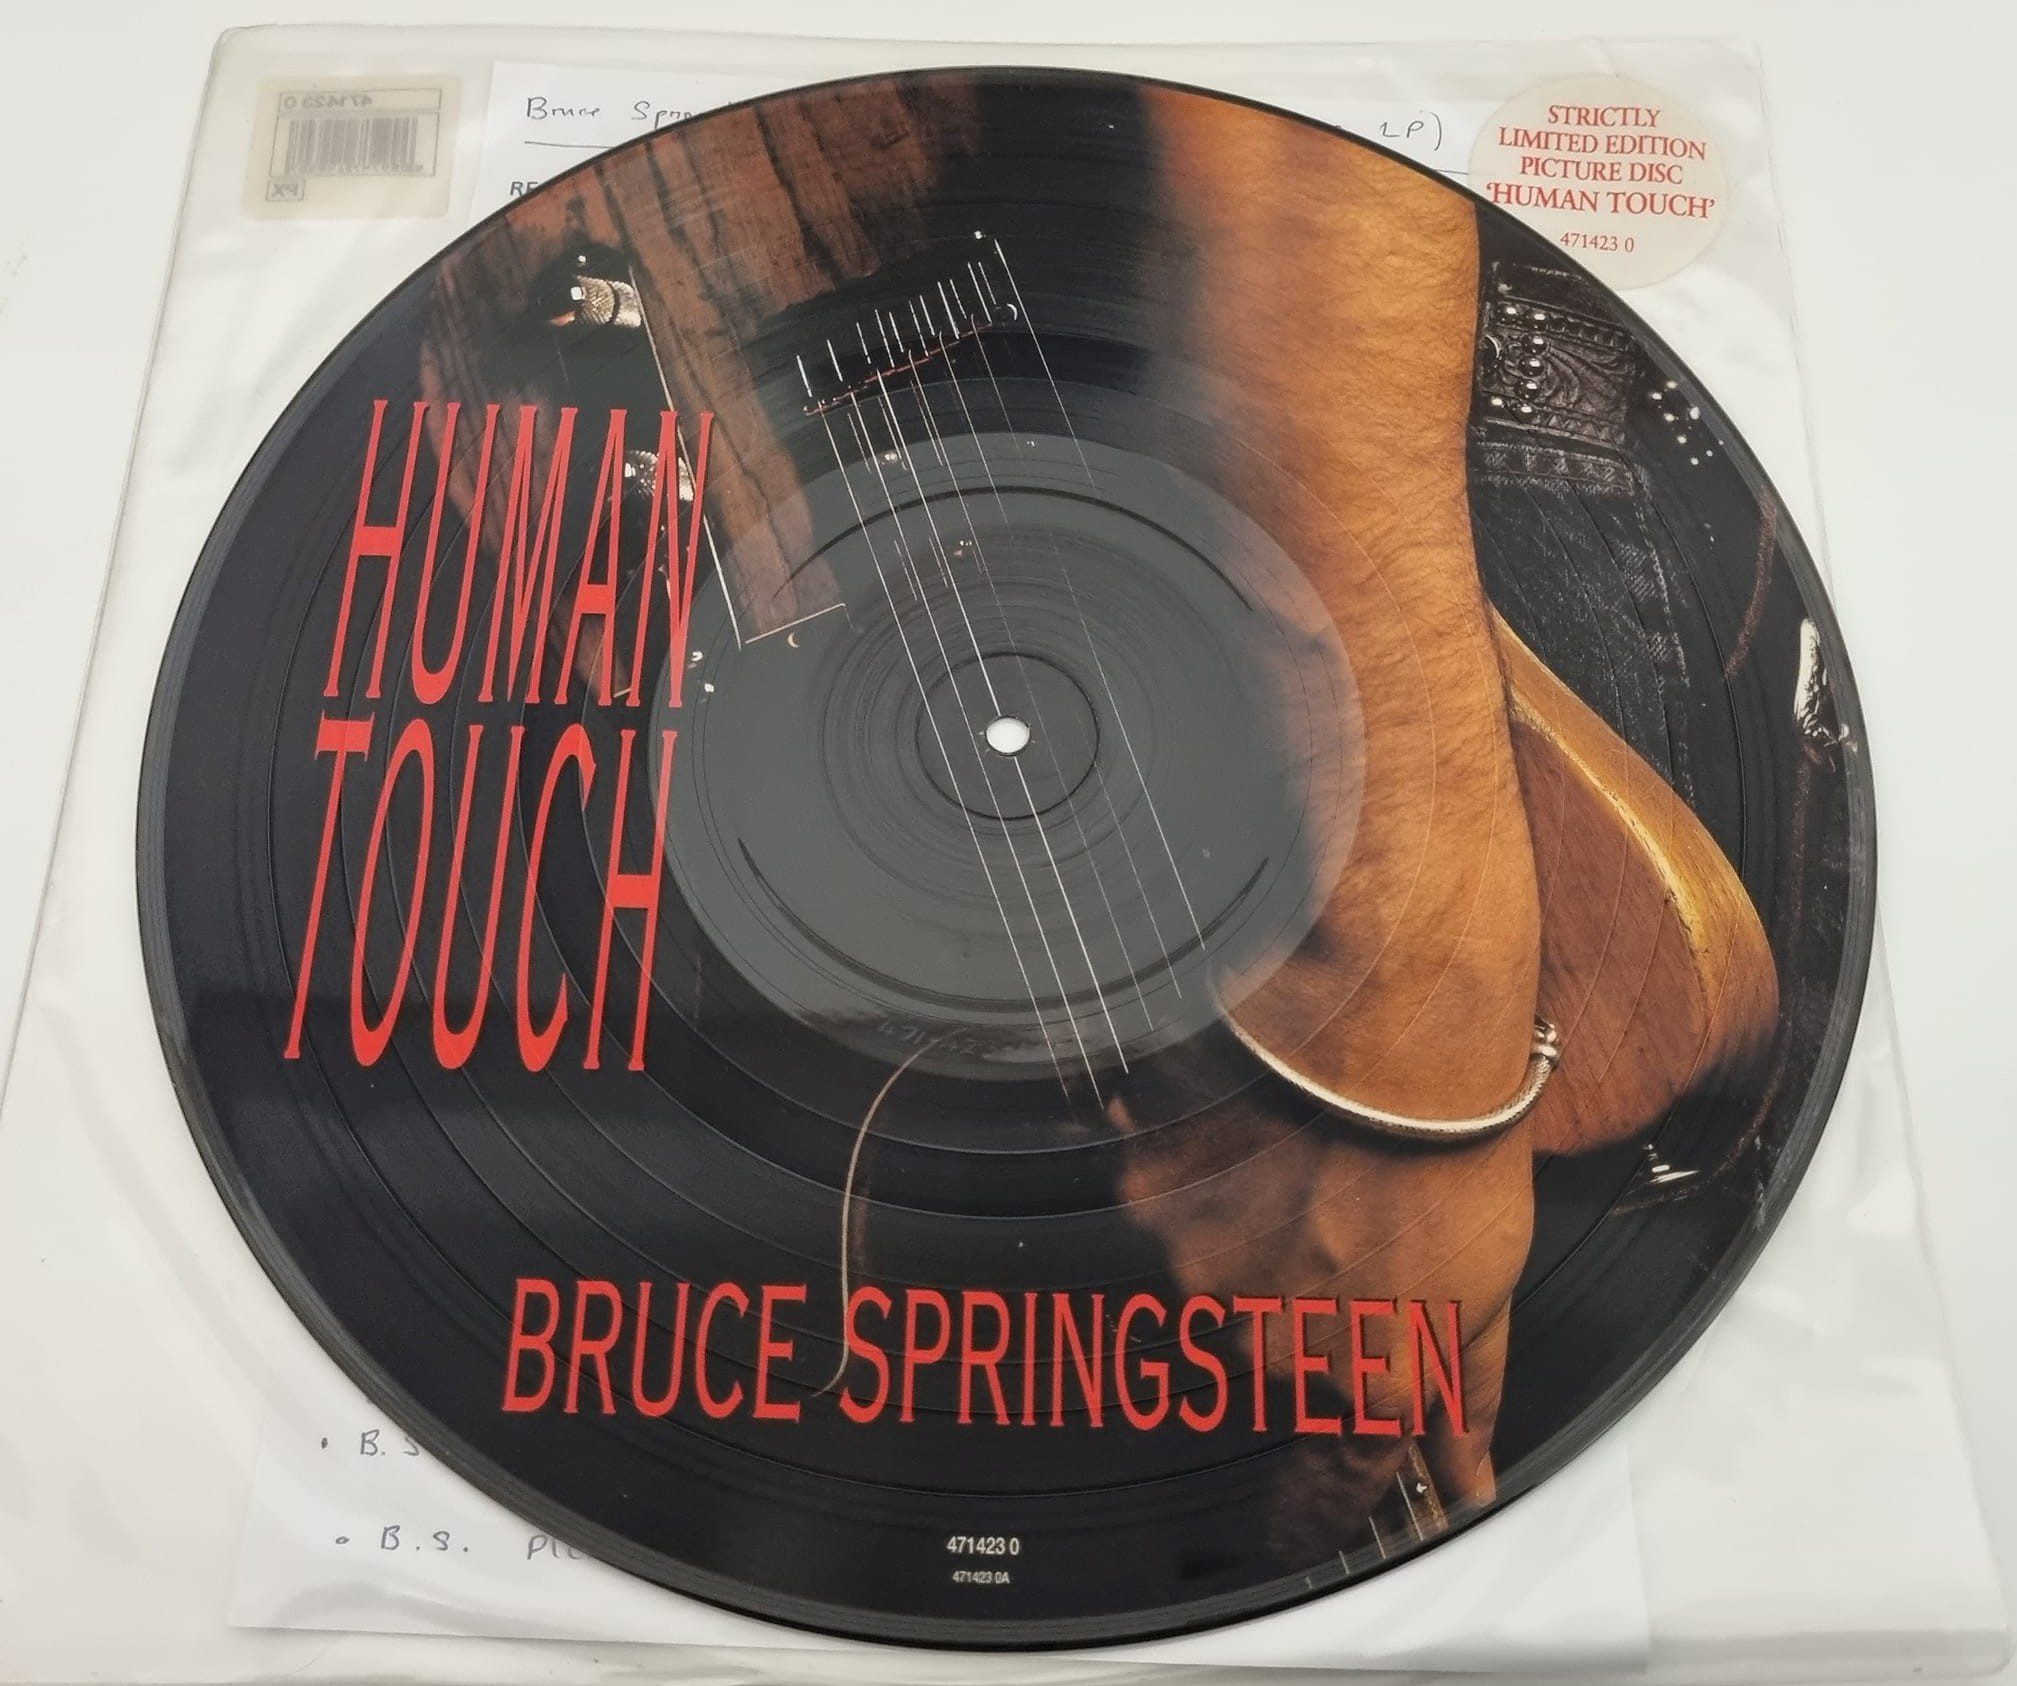 Buy this rare Bruce Springsteen record by clicking here